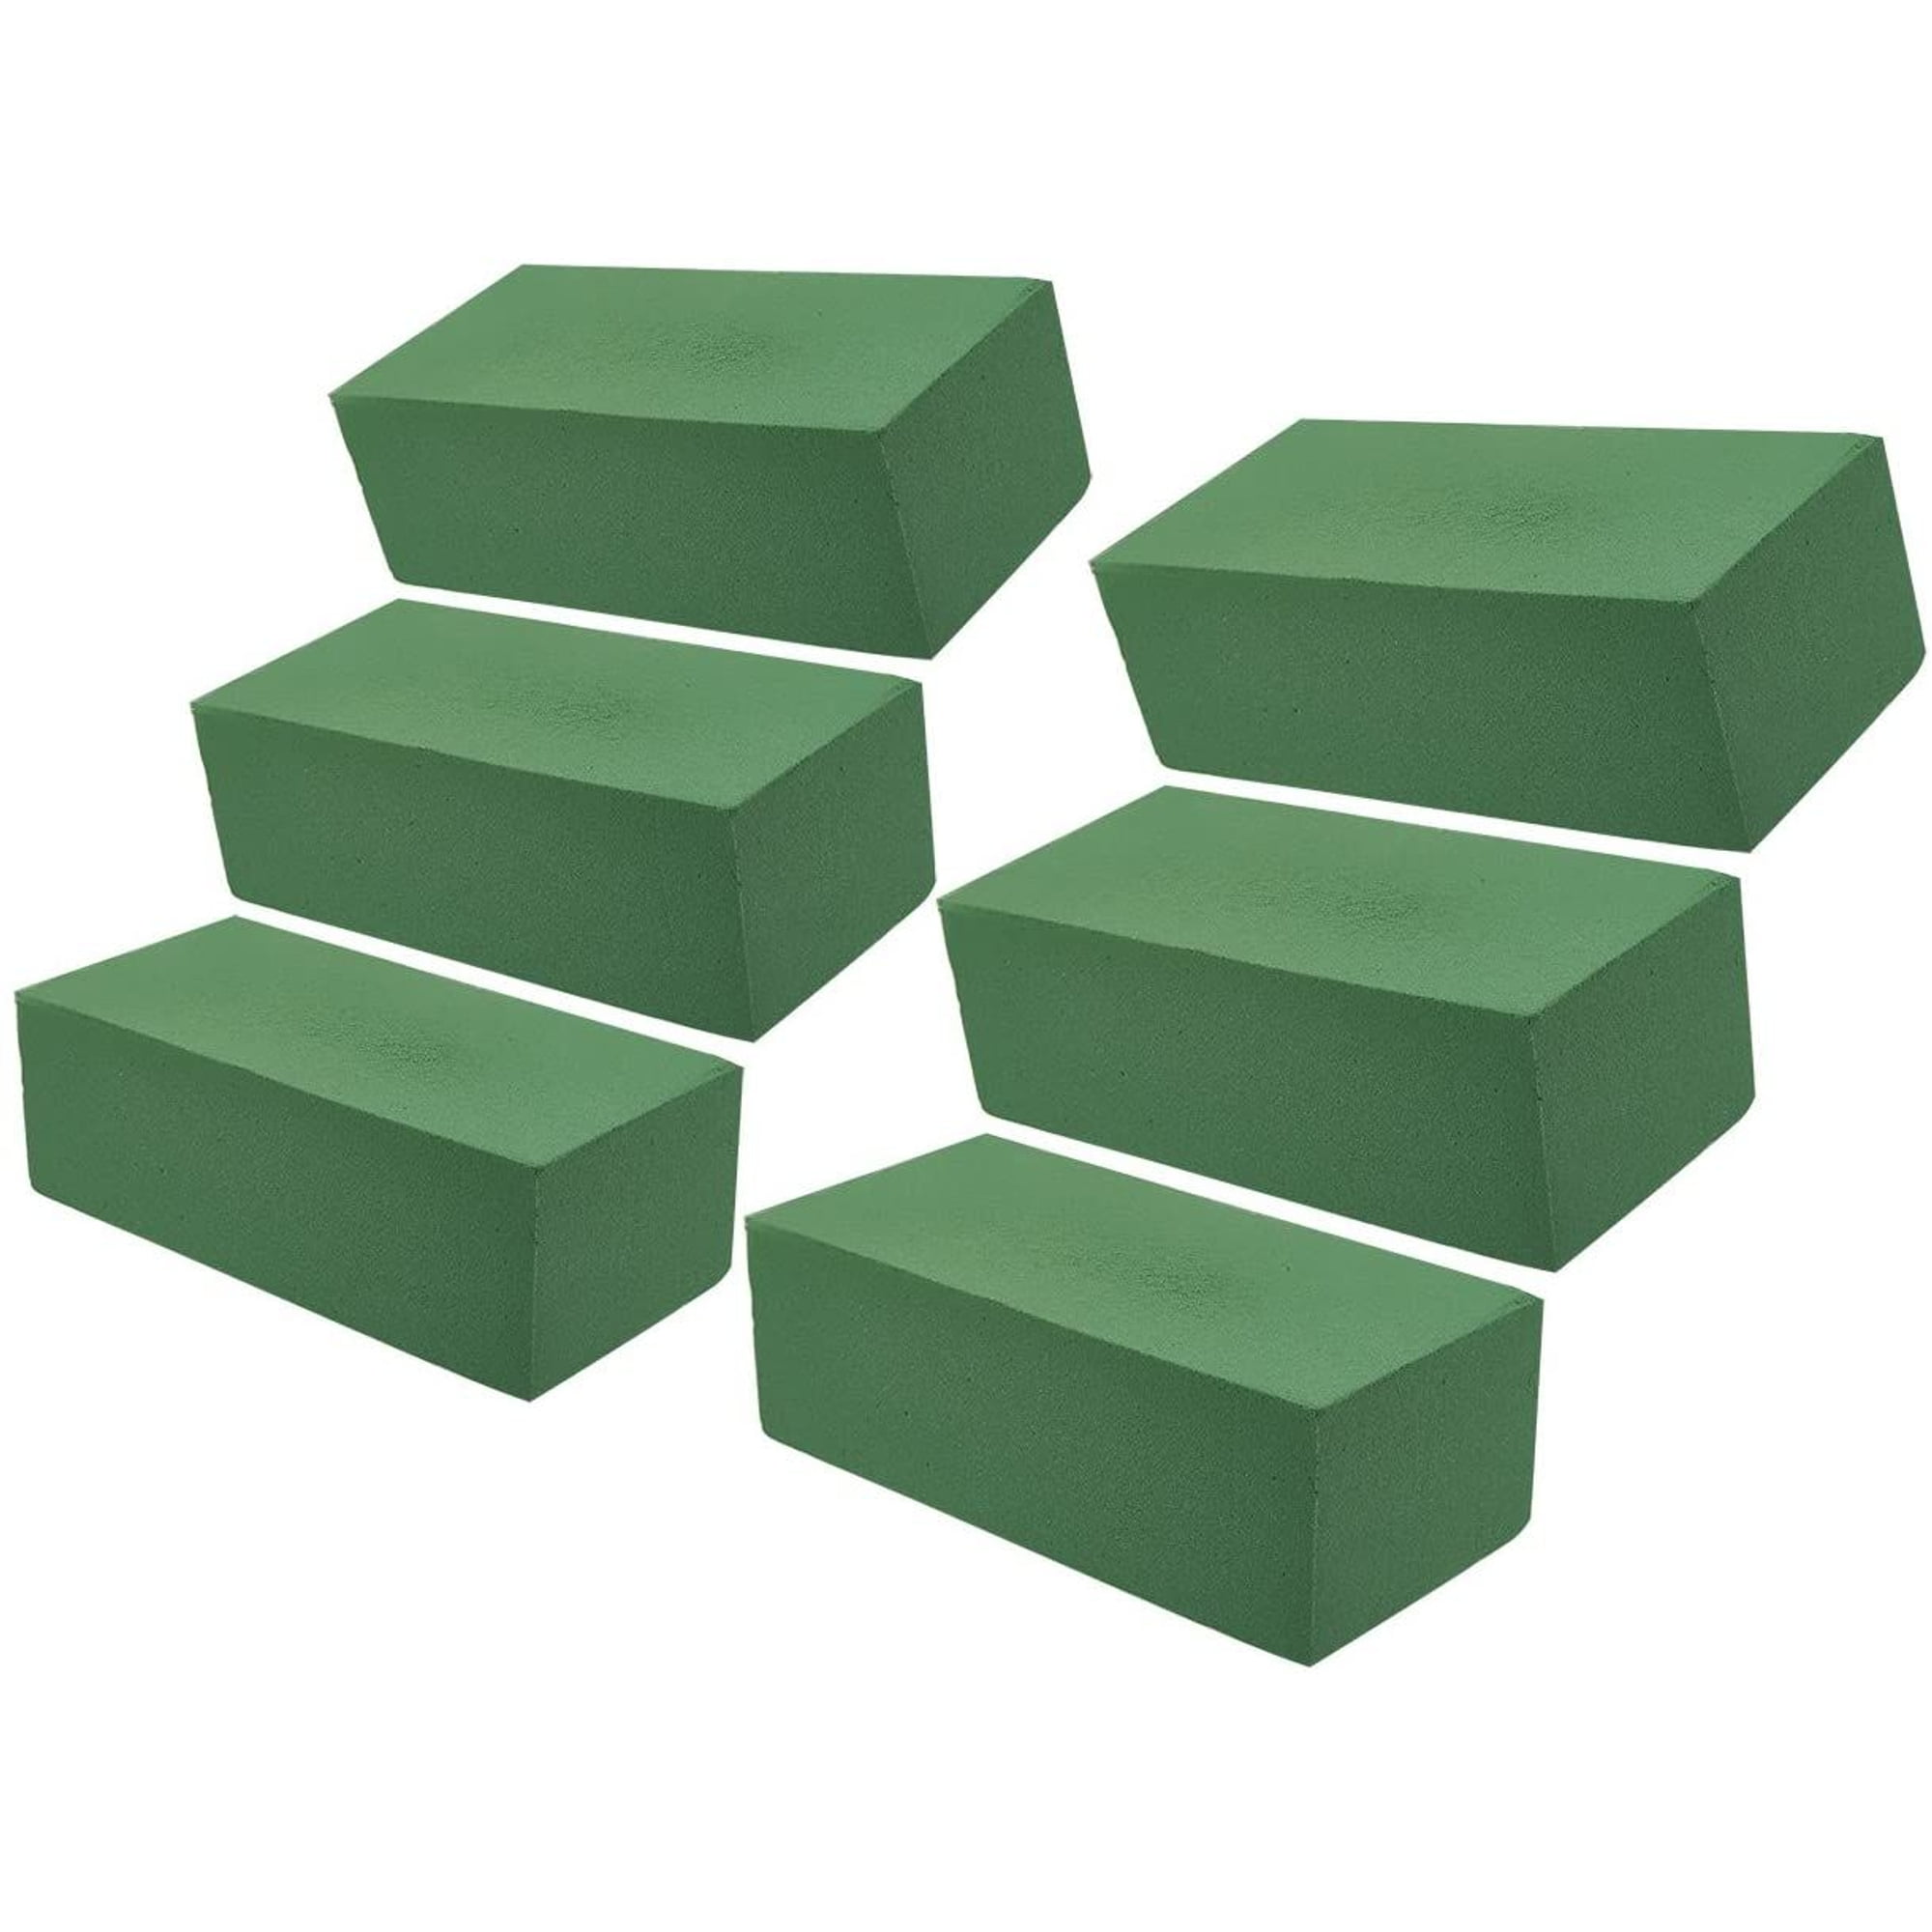 FORTETOP Floral Foam Blocks for Fresh and Artificial Flowers, Each (9” L x 4” W x 3” H), Dry and Wet Pack of 6 Flower Foam for Wedding, Birthdays